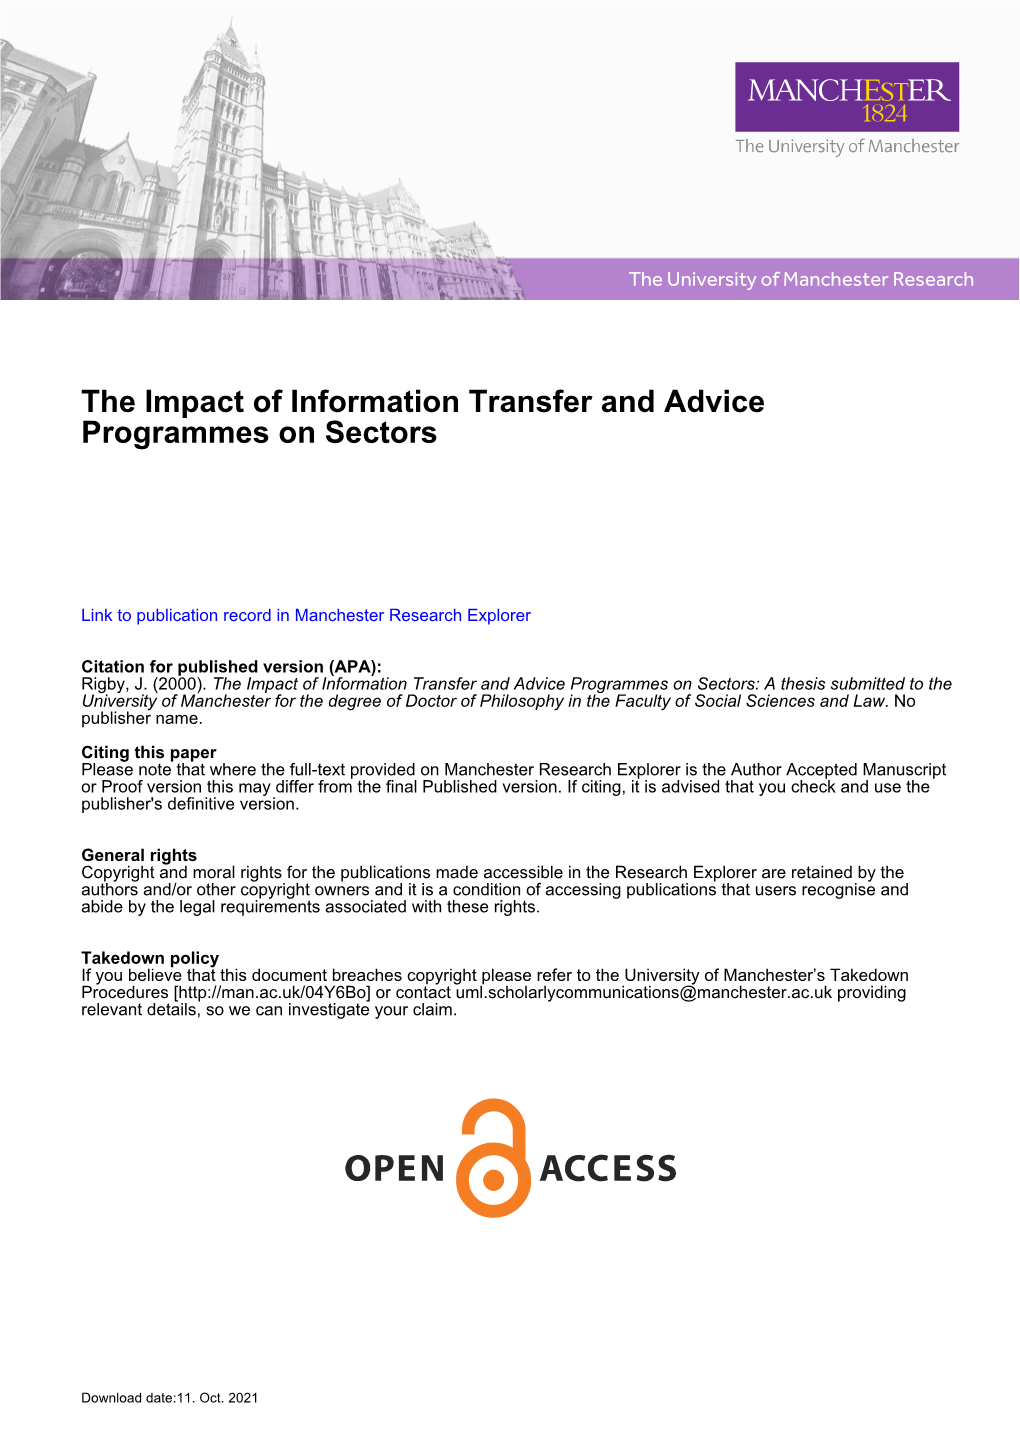 The Impact of Information Transfer and Advice Programmes on Sectors